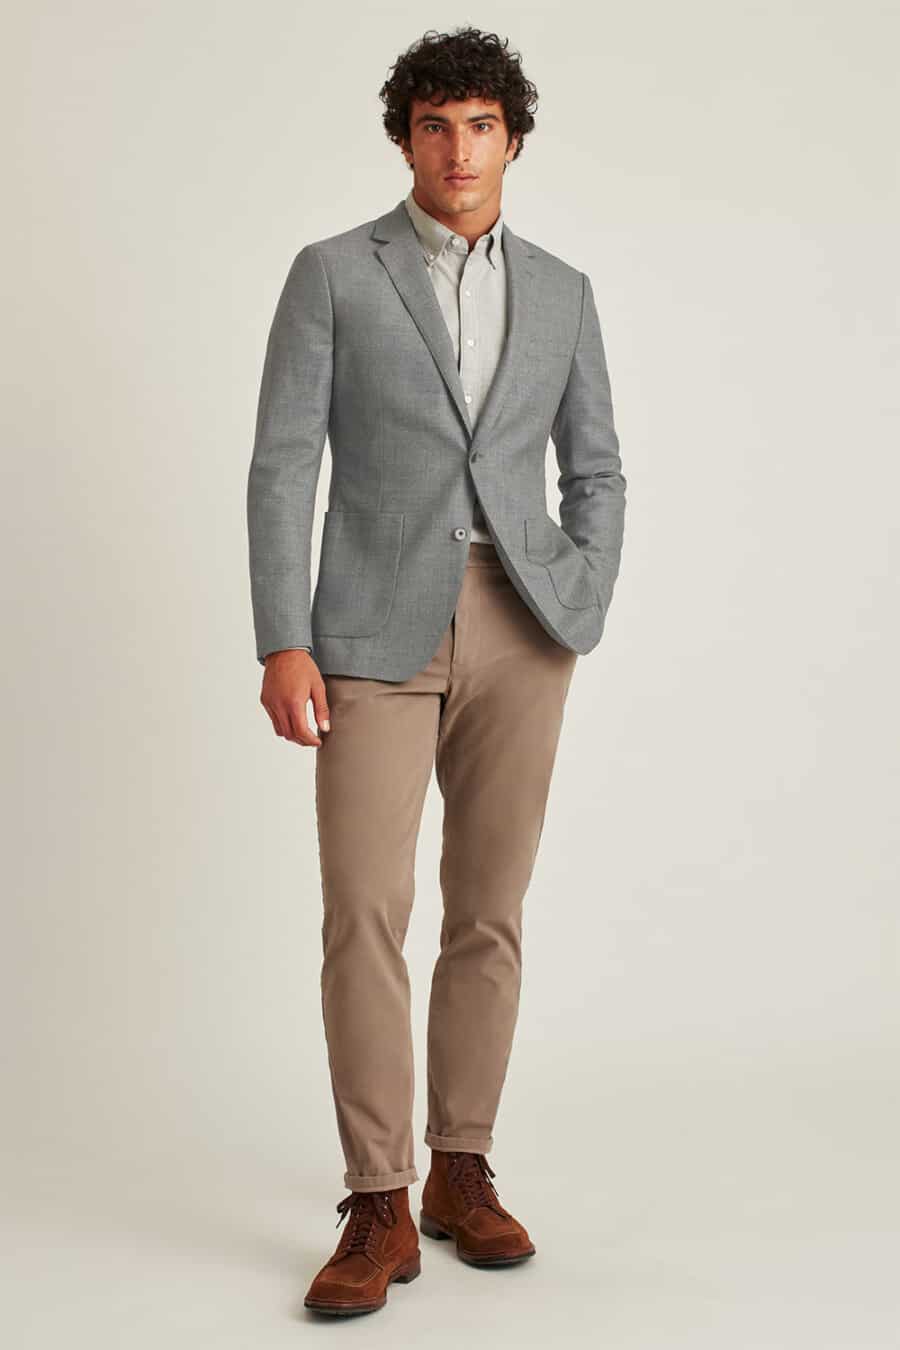 Men's brown pants, grey shirt, grey blazer and brown suede boots outfit